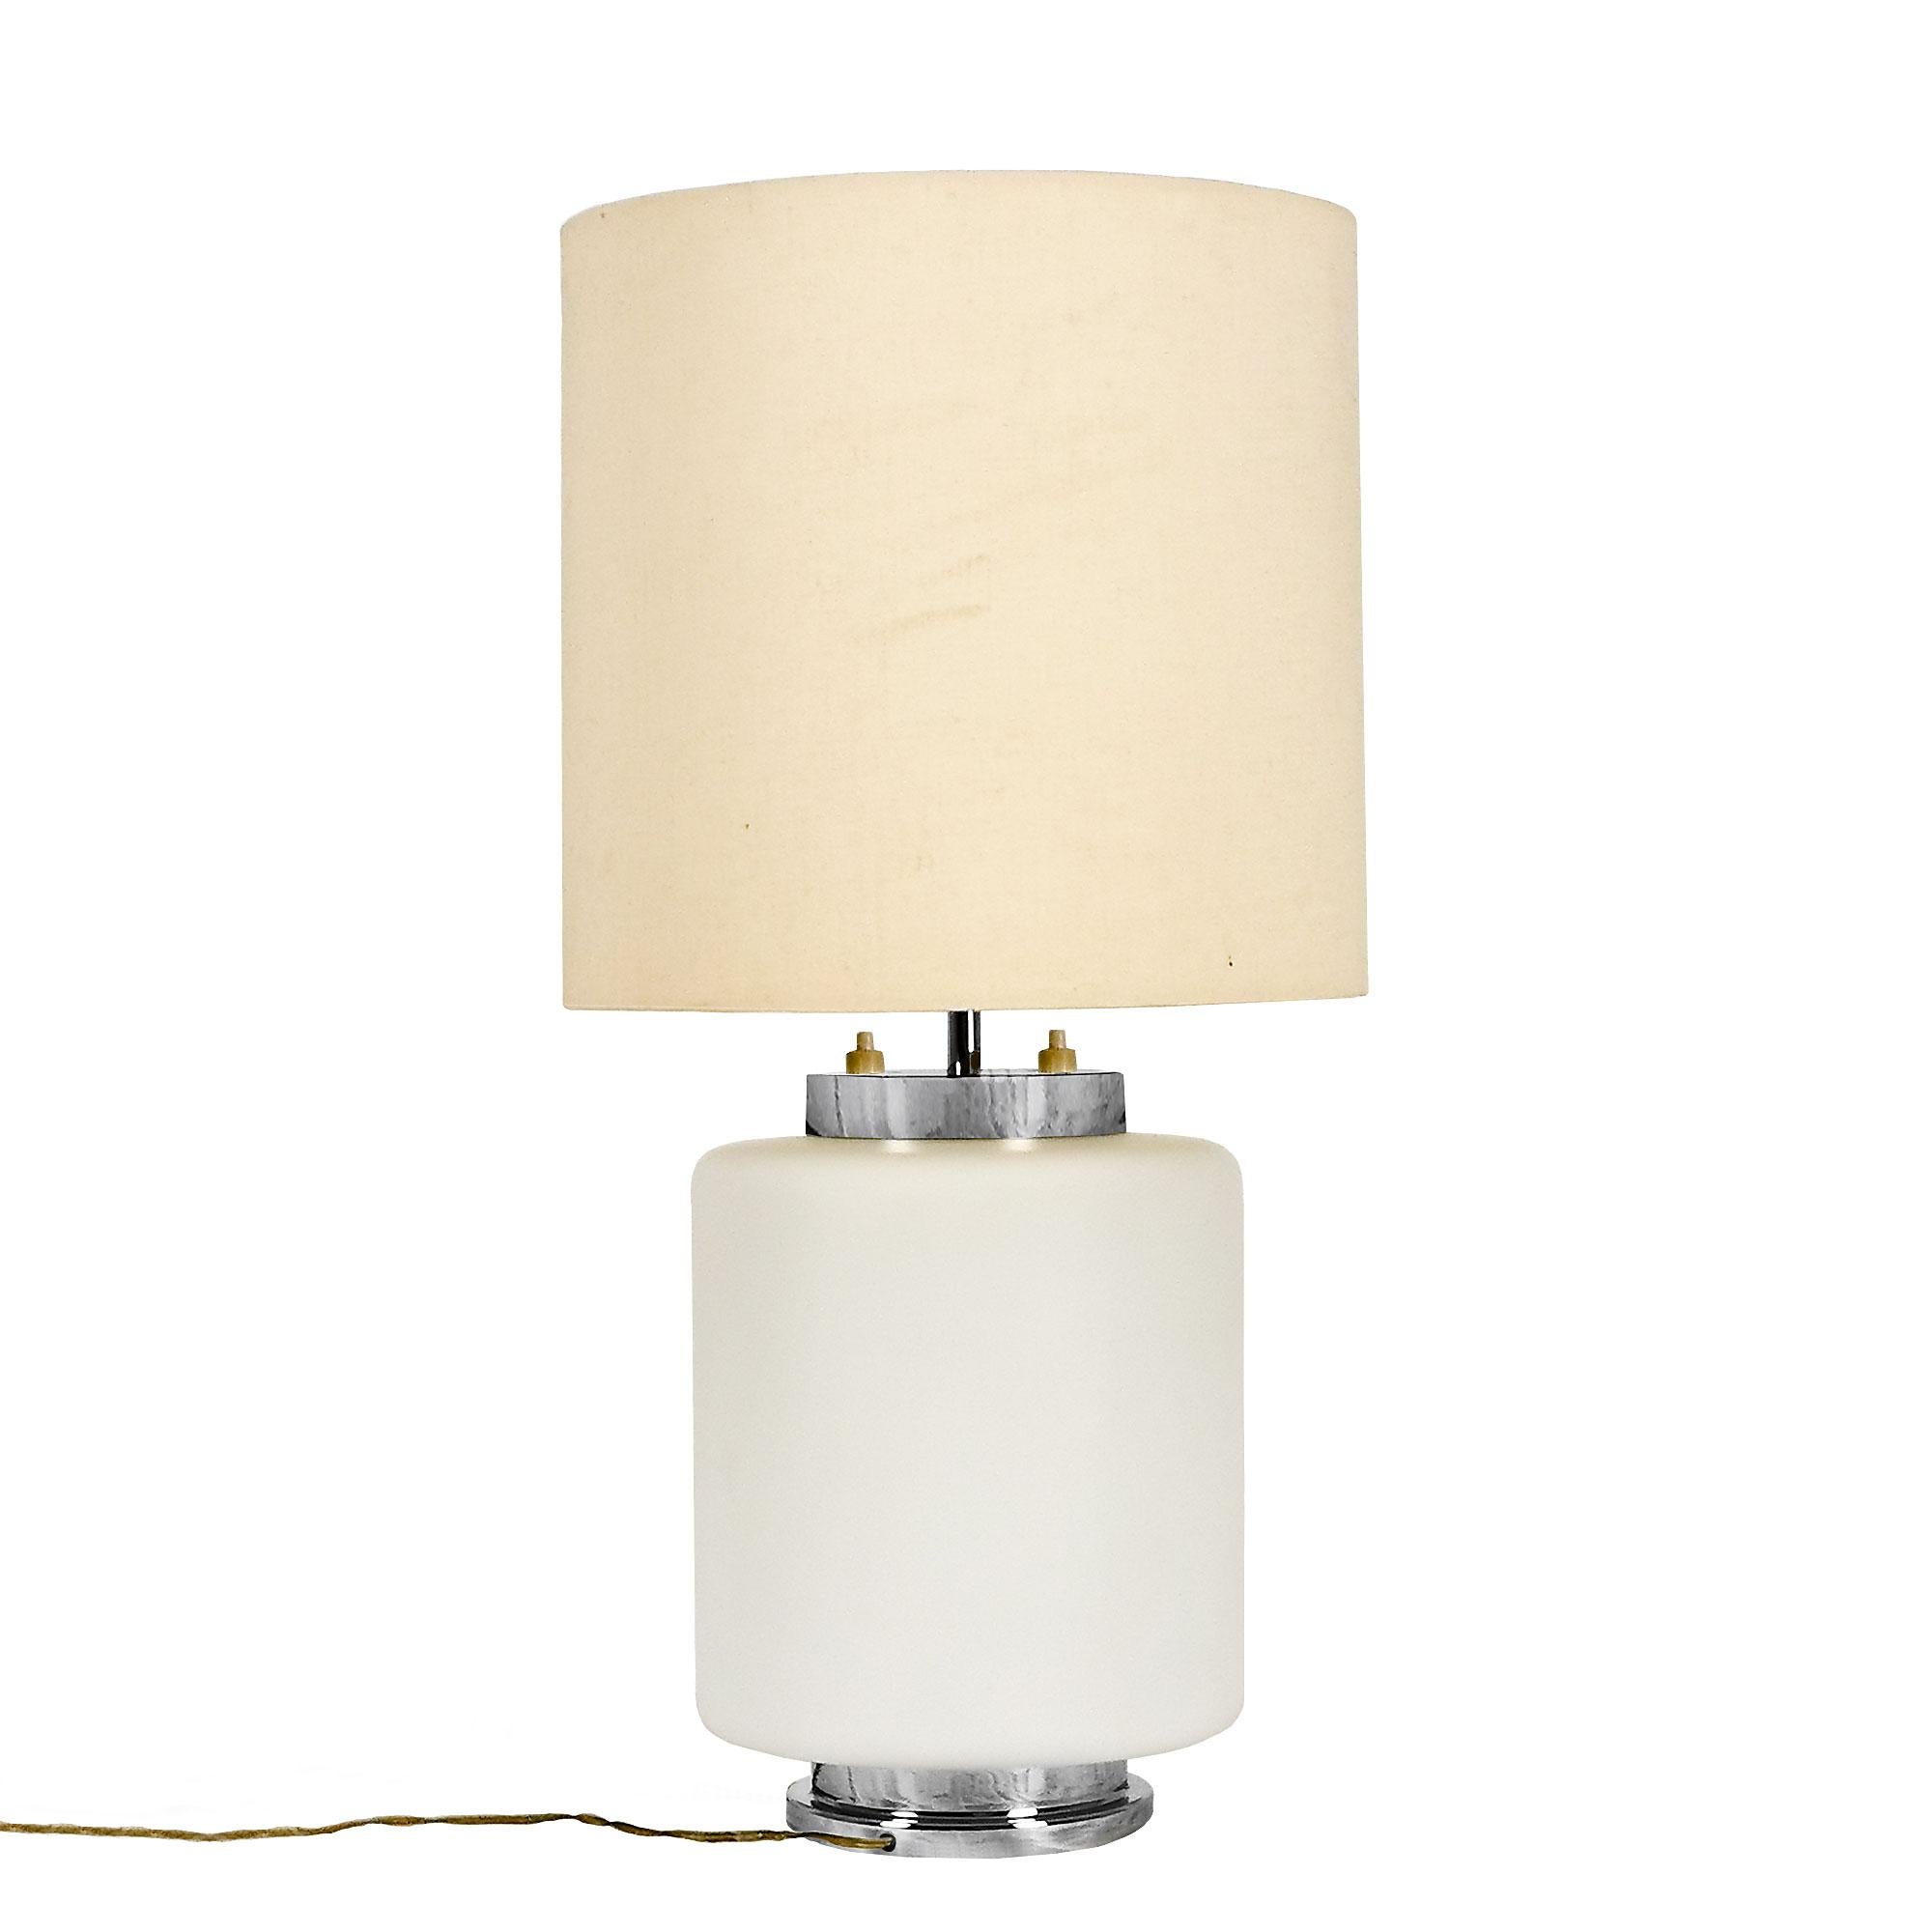 Table lamp, translucent opaline and chrome plated metal, double lightning system. Original beige fabric lampshade.

Italy c. 1960.